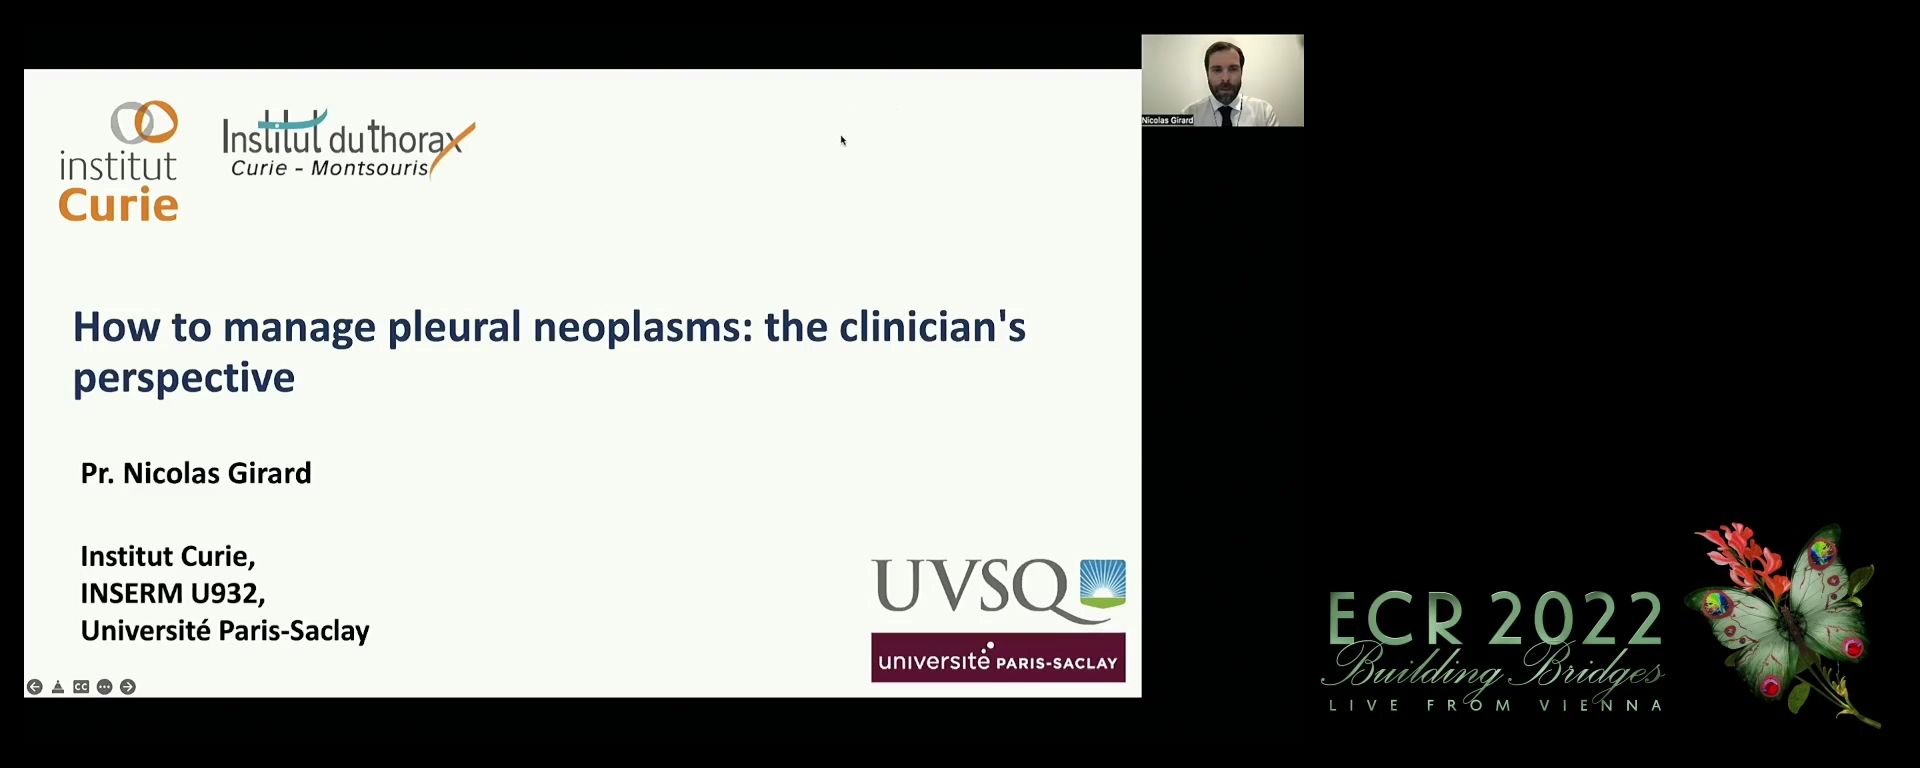 How to manage pleural neoplasms: the clinician's perspective